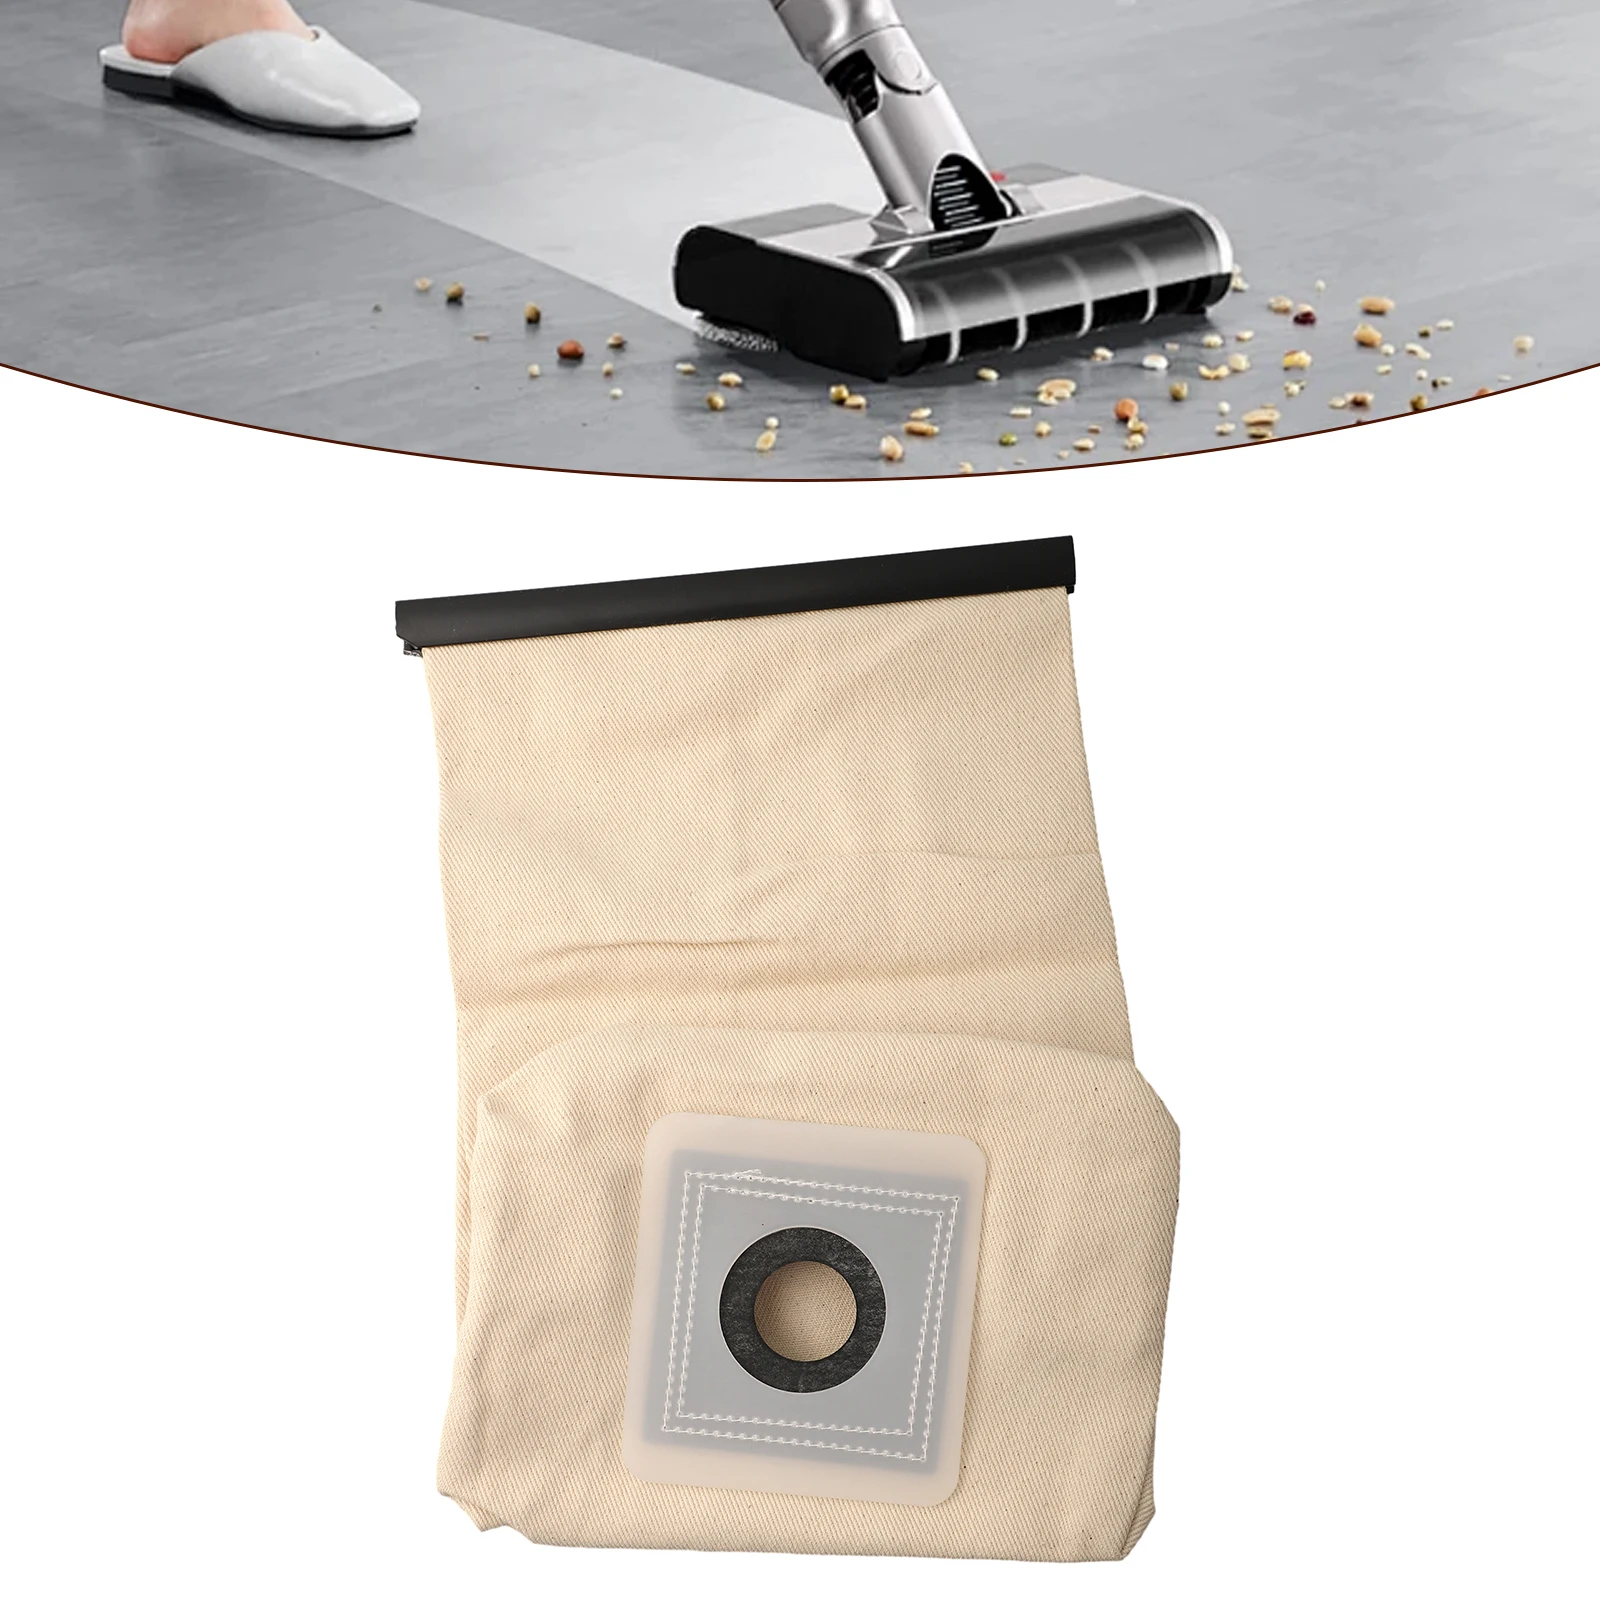 Vacuum Bags Dust Bag Reusable 95332110 9.533-211.0 Cleaning Tool For Hoover Filter Non-woven Dust Bag For Karcher high quality washable dust bag dust bags 166084 9 cl100 106 180 dcl180 dust bag makita non woven plastic white